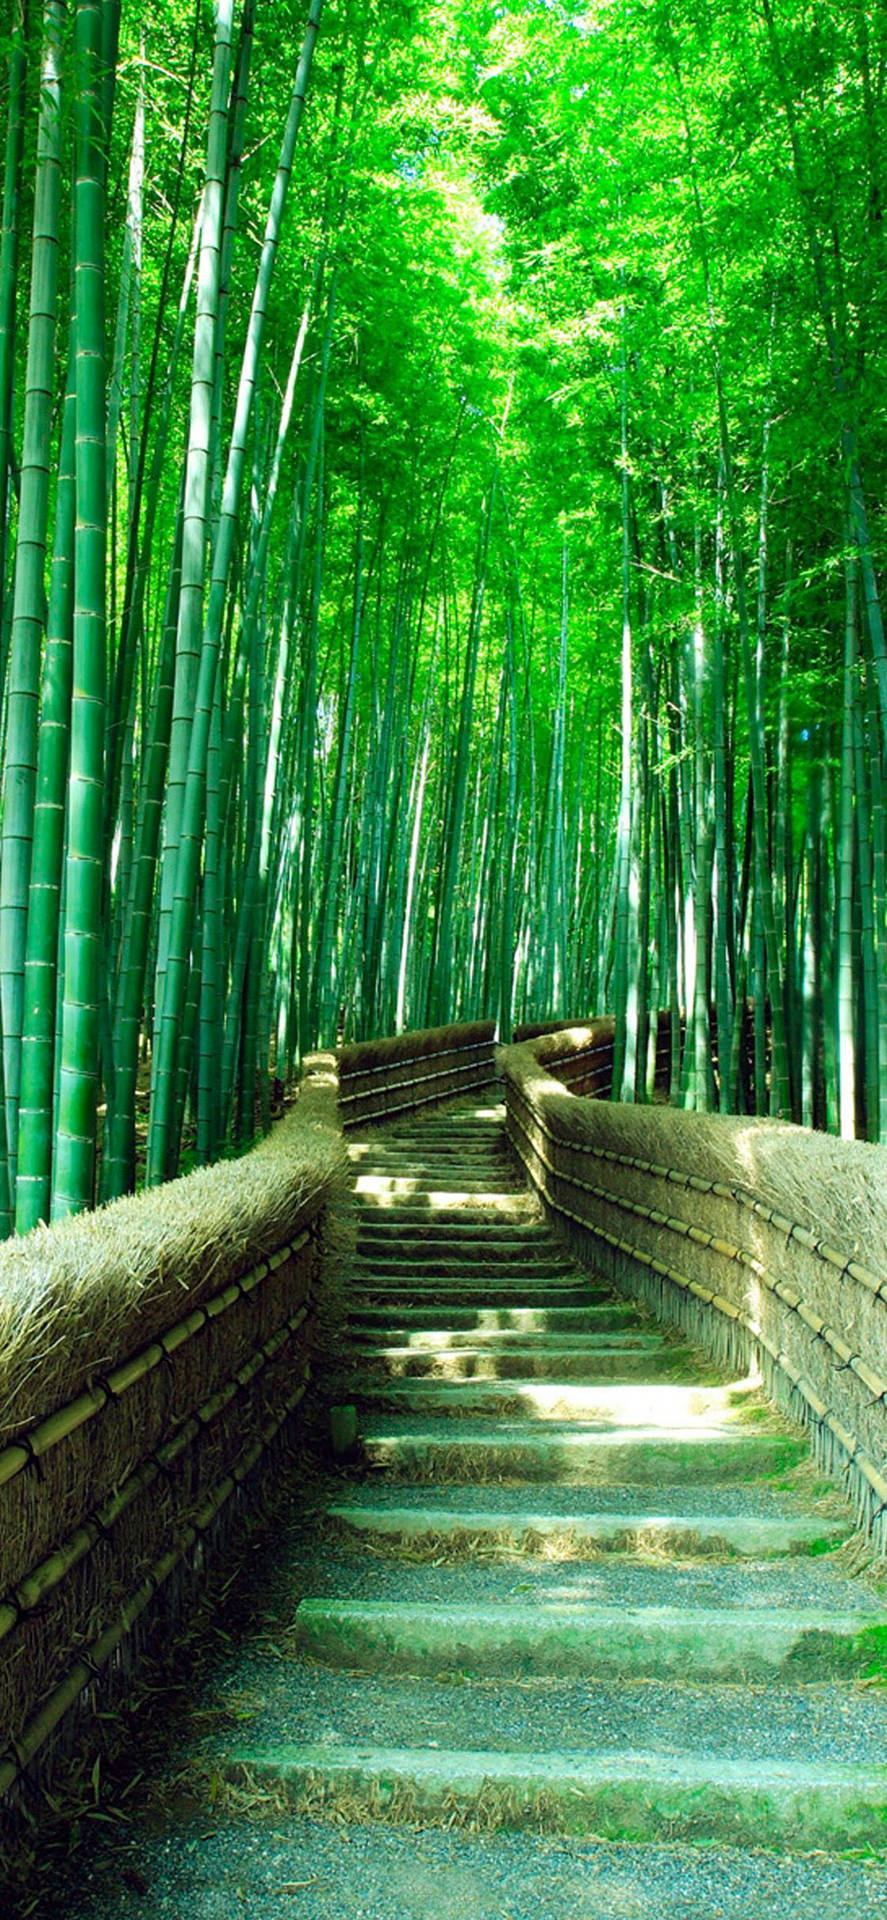 Green Bamboo Forest Iphone With Stairs